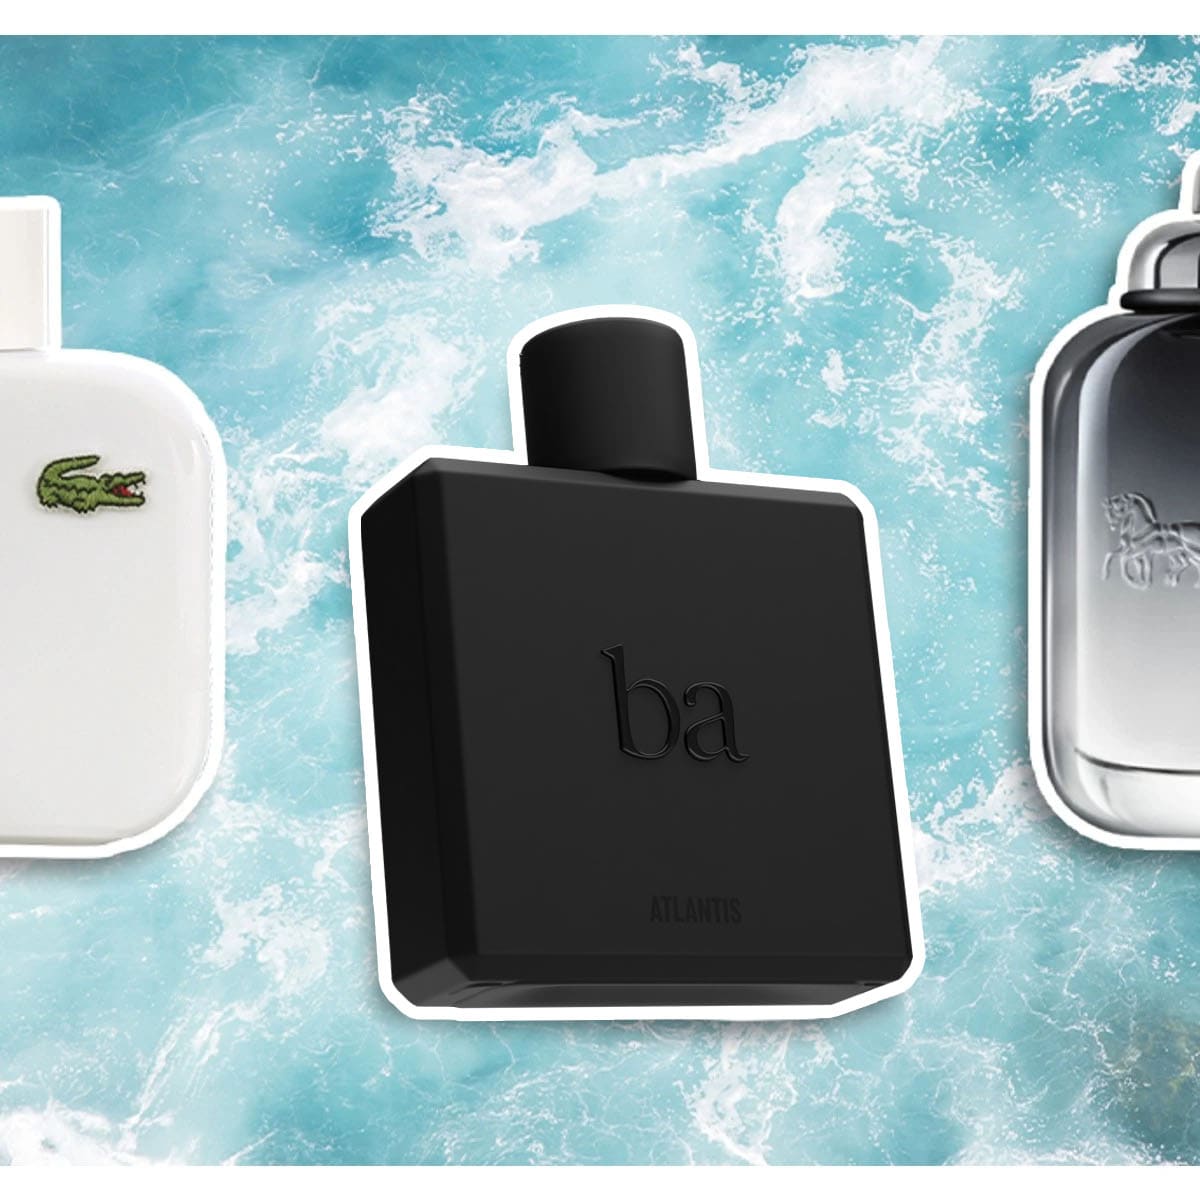 When should you use certain fragrances? — School of Scent